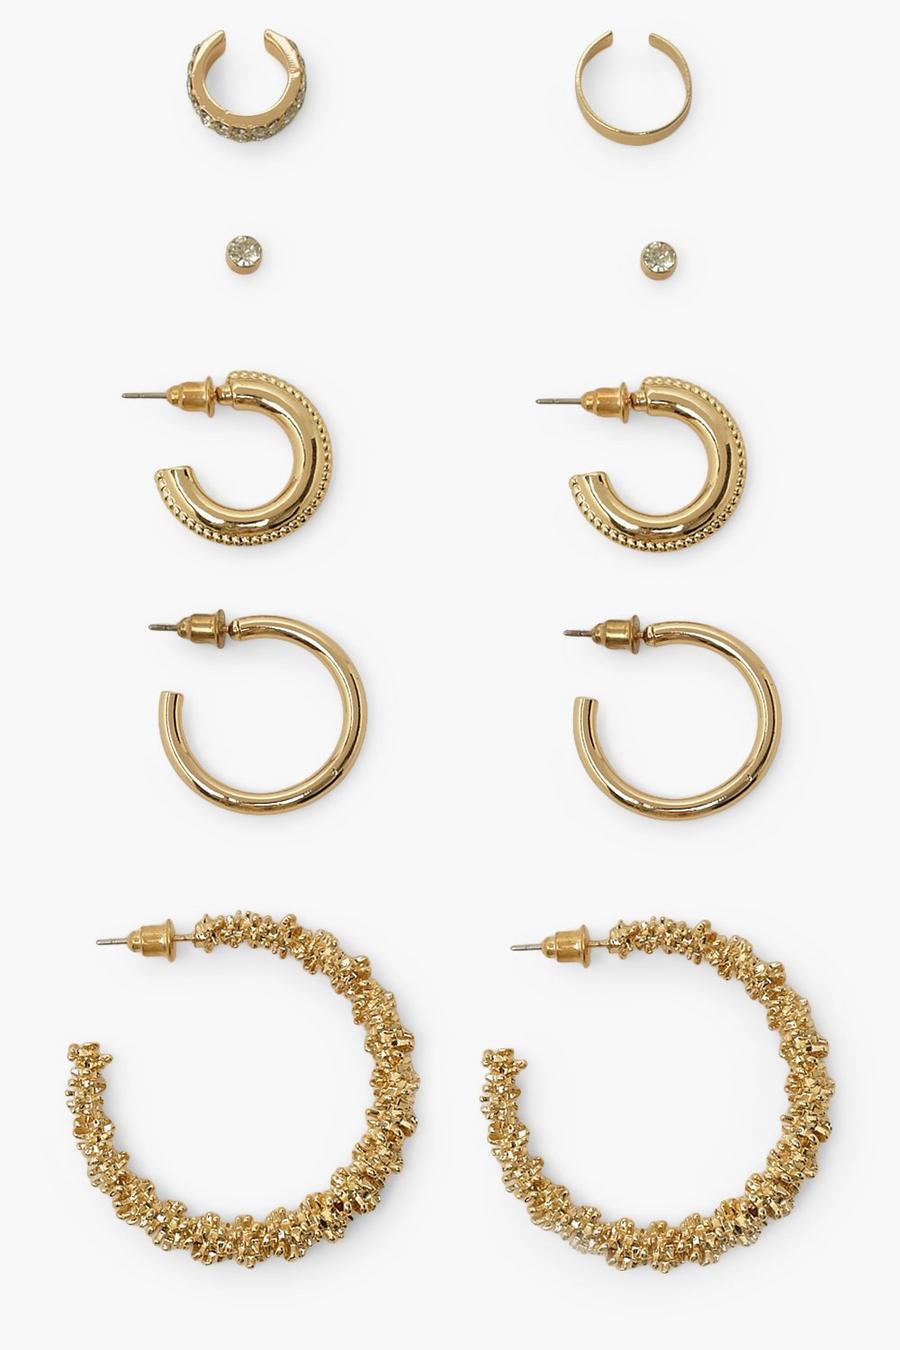 Gold metallic Textured Mix Hoop Earing Pack With Cuffs